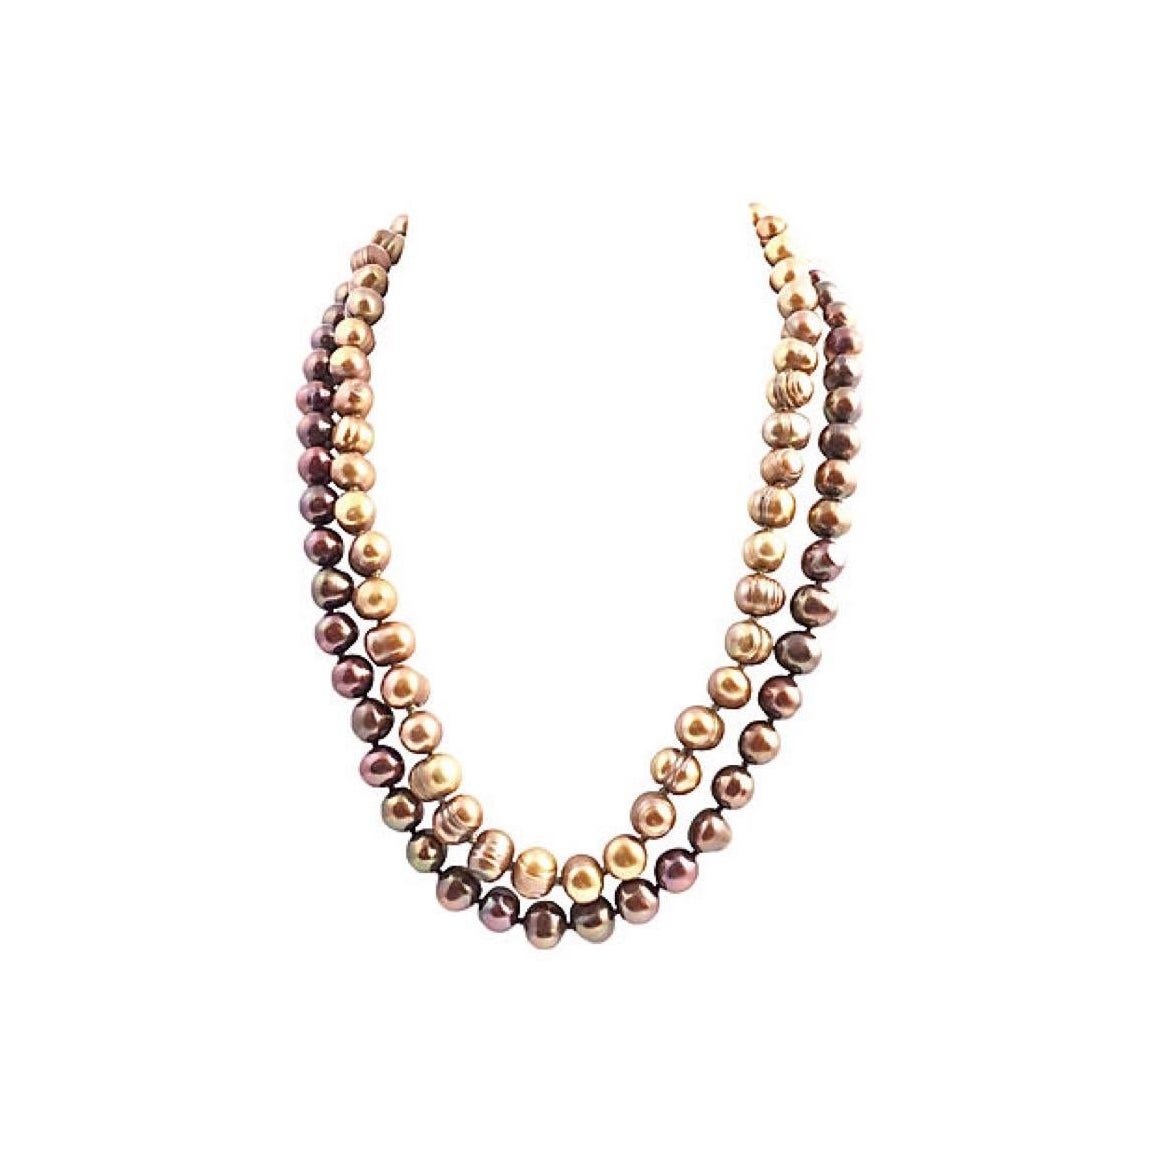 Golden and Mocha Cultured Pearl Necklaces Pair Set of 2